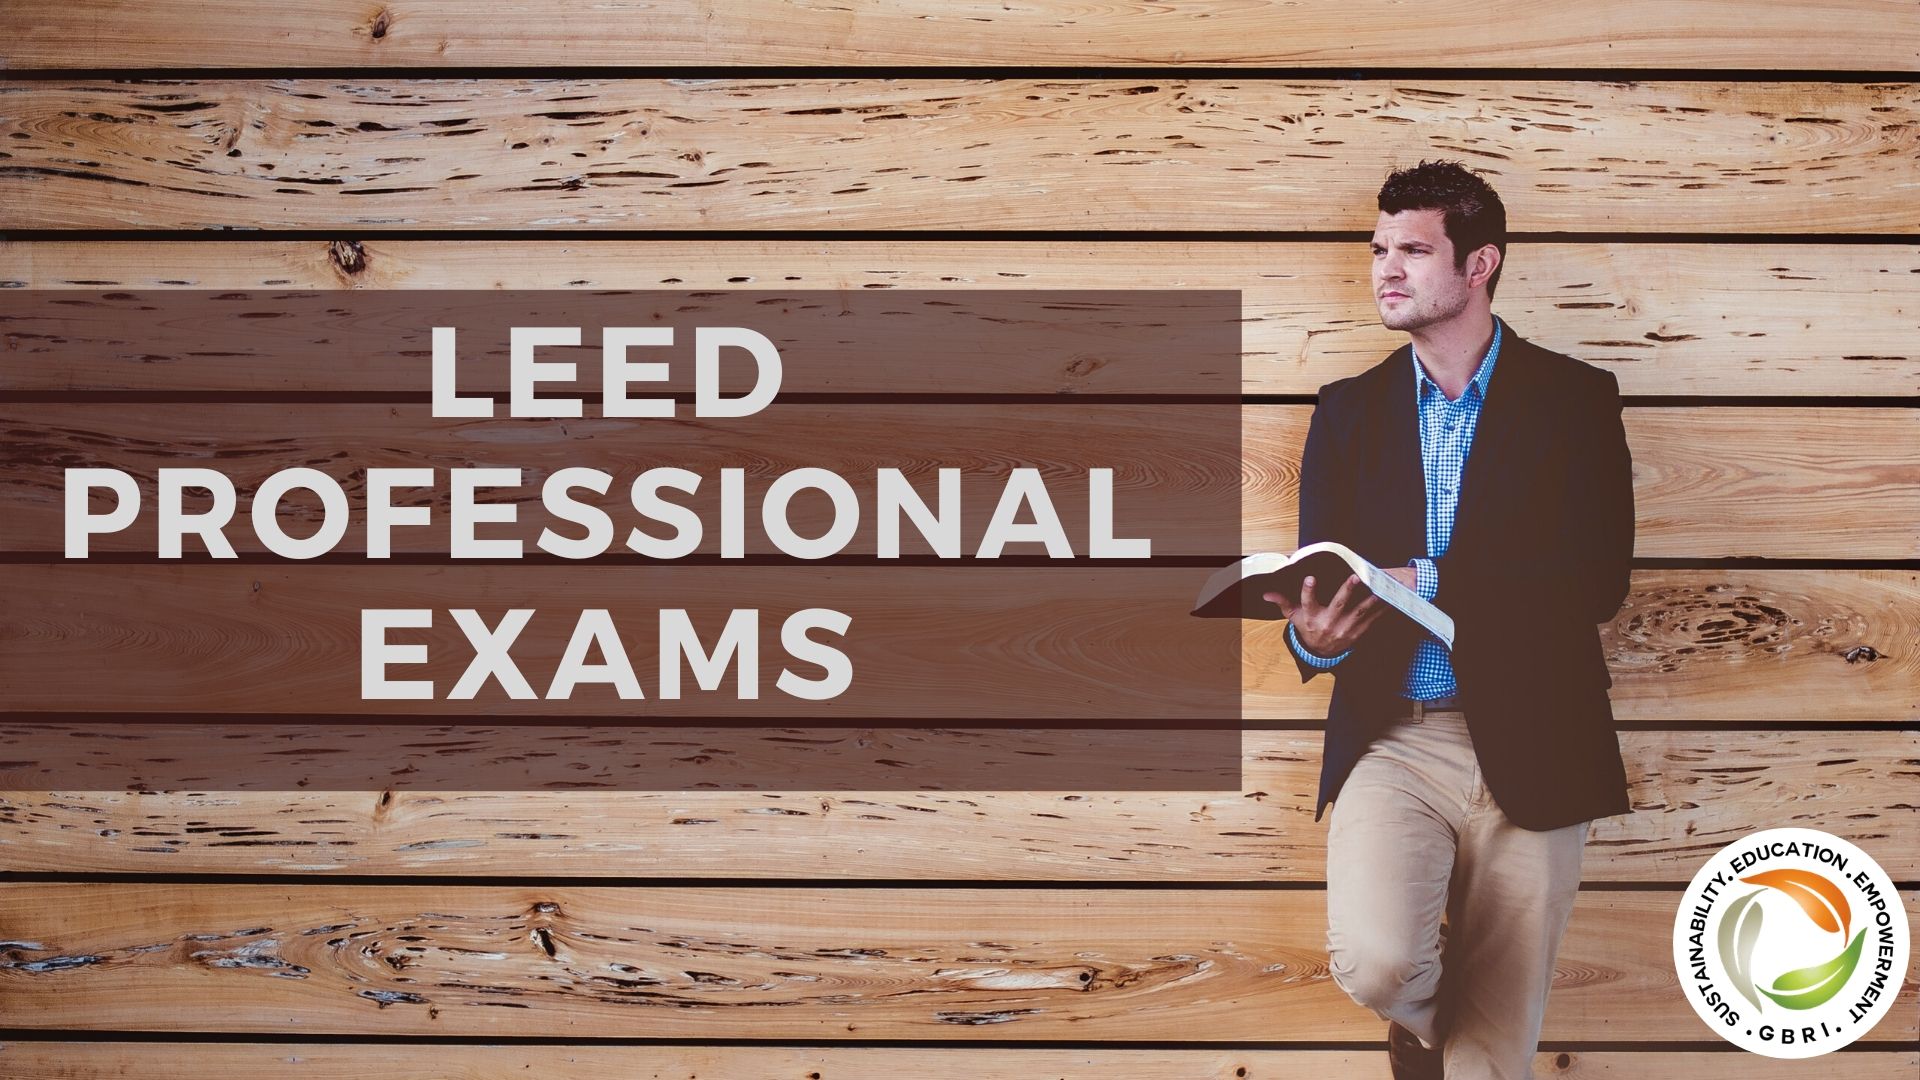 LEED Professional Exams|What is leed professional exams|LEED Green Associate Exam prep|LEED AP professiponal exam|How to become a LEED Accredited Professional?